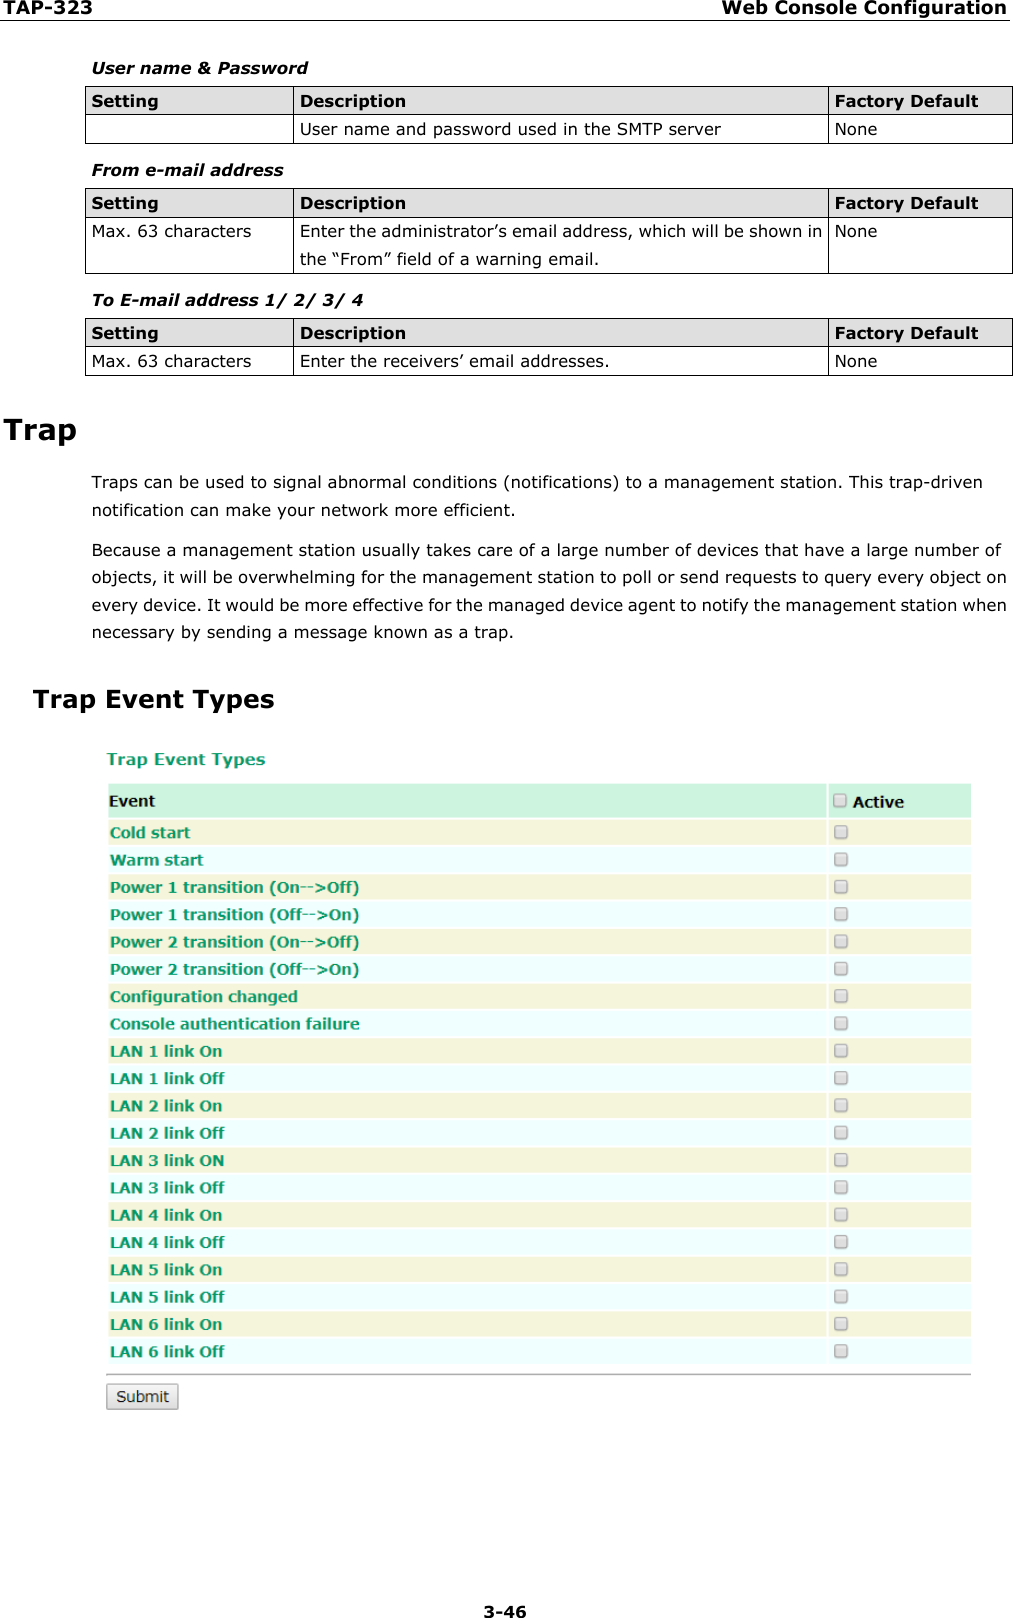 TAP-323 Web Console Configuration  3-46 User name &amp; Password Setting Description Factory Default   User name and password used in the SMTP server None From e-mail address Setting Description Factory Default Max. 63 characters Enter the administrator’s email address, which will be shown in the “From” field of a warning email. None To E-mail address 1/ 2/ 3/ 4 Setting Description Factory Default Max. 63 characters Enter the receivers’ email addresses. None Trap Traps can be used to signal abnormal conditions (notifications) to a management station. This trap-driven notification can make your network more efficient. Because a management station usually takes care of a large number of devices that have a large number of objects, it will be overwhelming for the management station to poll or send requests to query every object on every device. It would be more effective for the managed device agent to notify the management station when necessary by sending a message known as a trap. Trap Event Types  